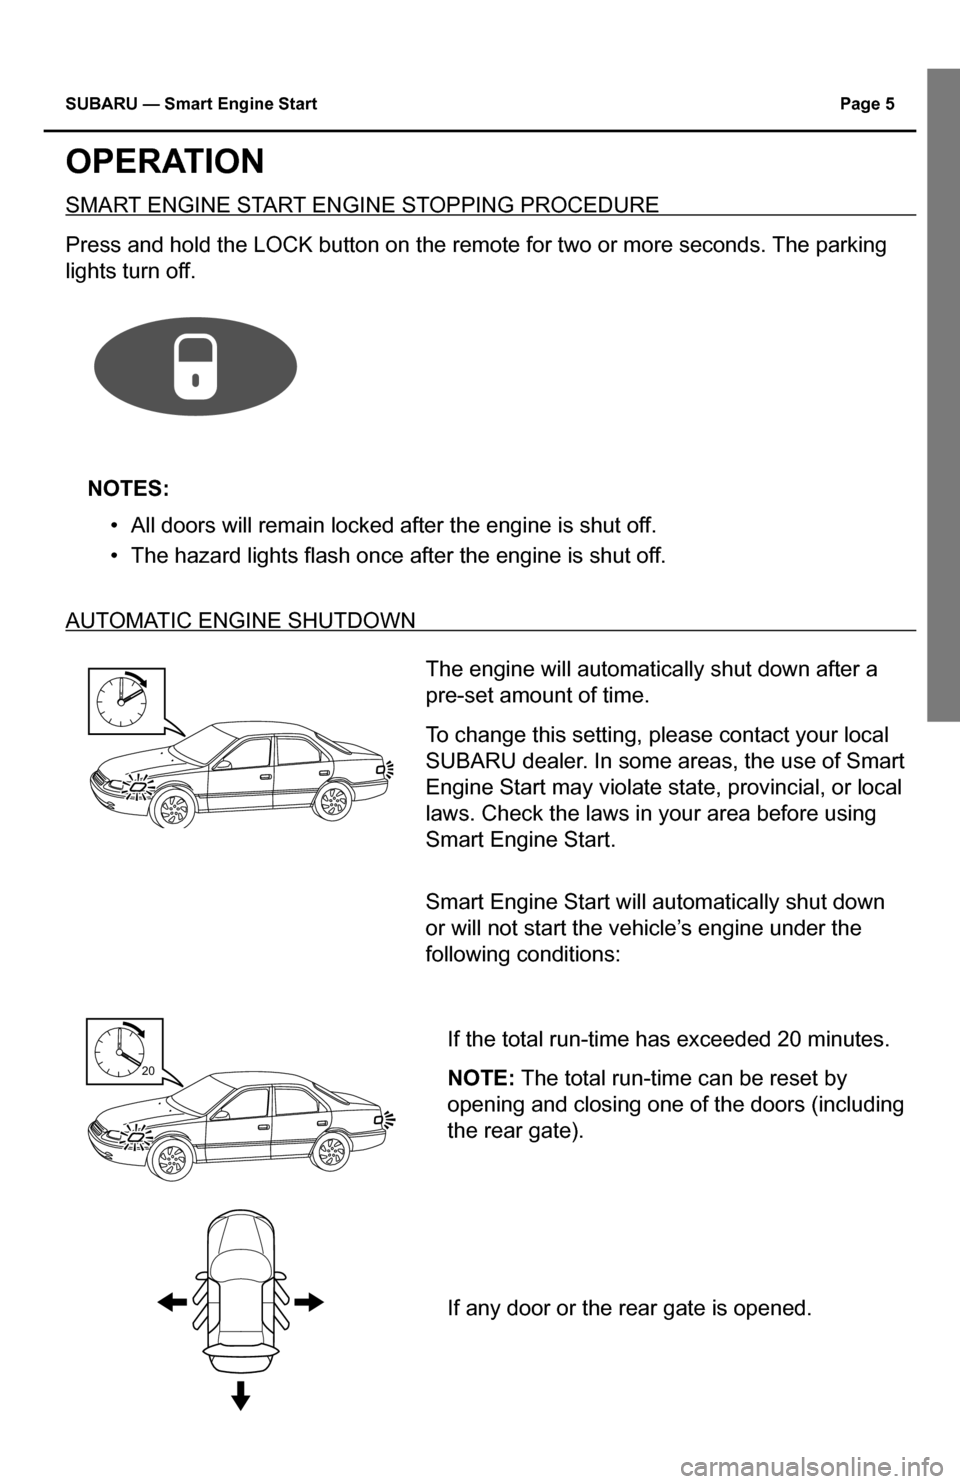 SUBARU IMPREZA 2015 4.G Smart Engine Start Guide SUBARU — Smart Engine Start Page 5 
OPERATION
SMART ENGINE START ENGINE STOPPING PROCEDURE
Press and hold the LOCK button on the remote for two or more seconds. The parking 
lights turn off. 
 
 
NO